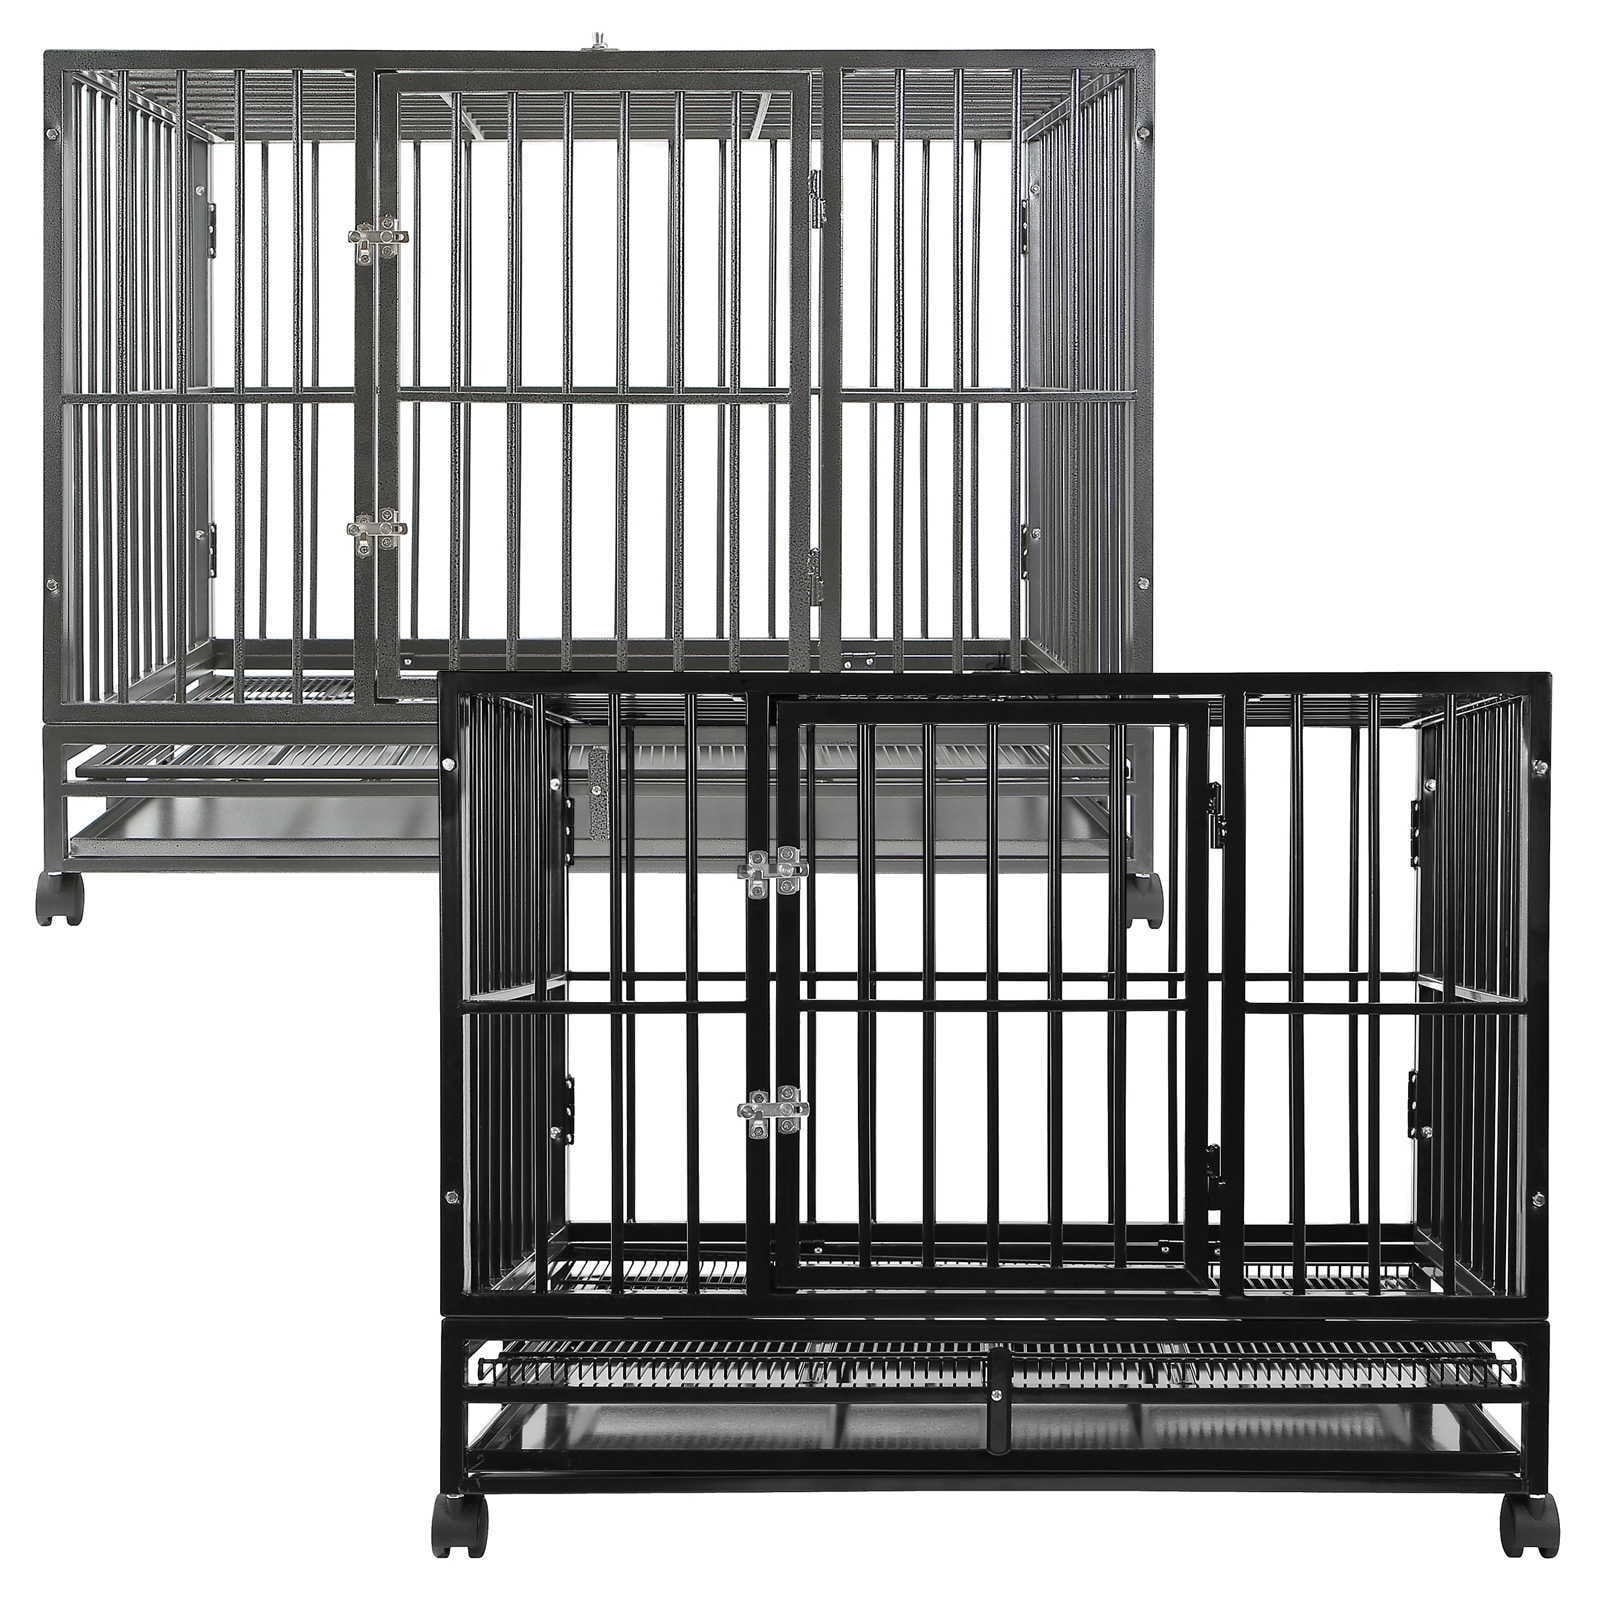 dog pen cage